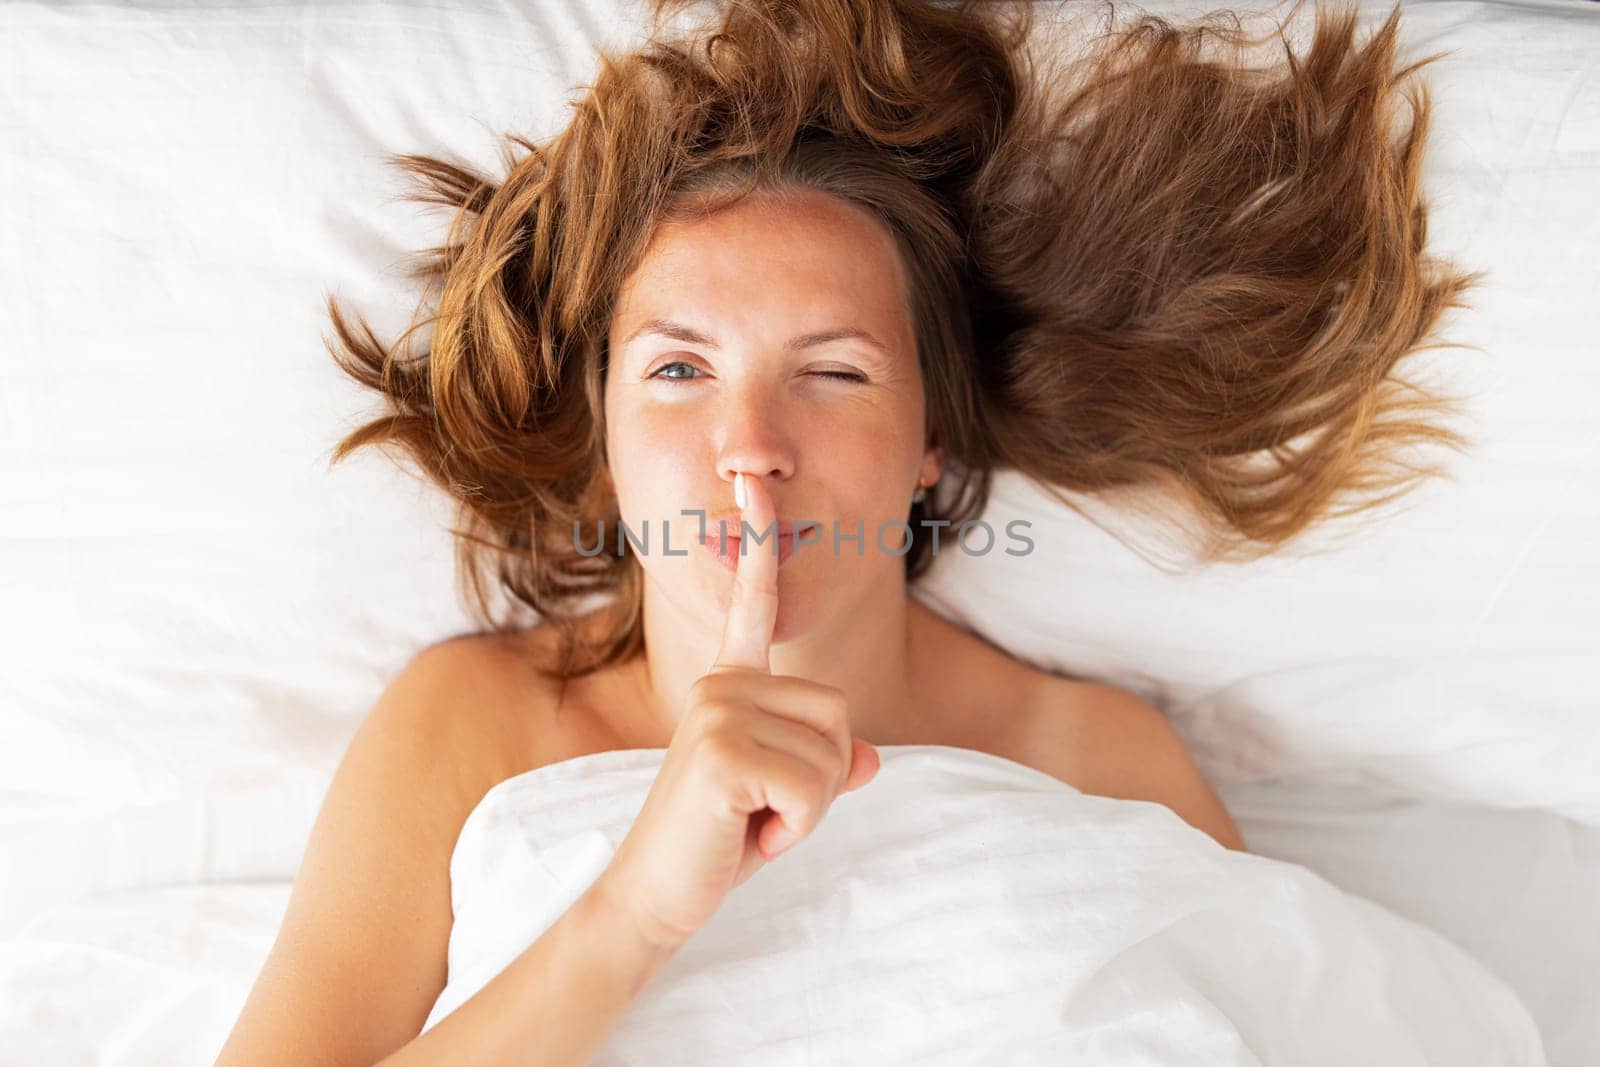 Women's secrets concept. Portrait of a woman lying in bed covered with a blanket holding finger on lips, asking to be quiet, gesturing and showing shh hush sign.